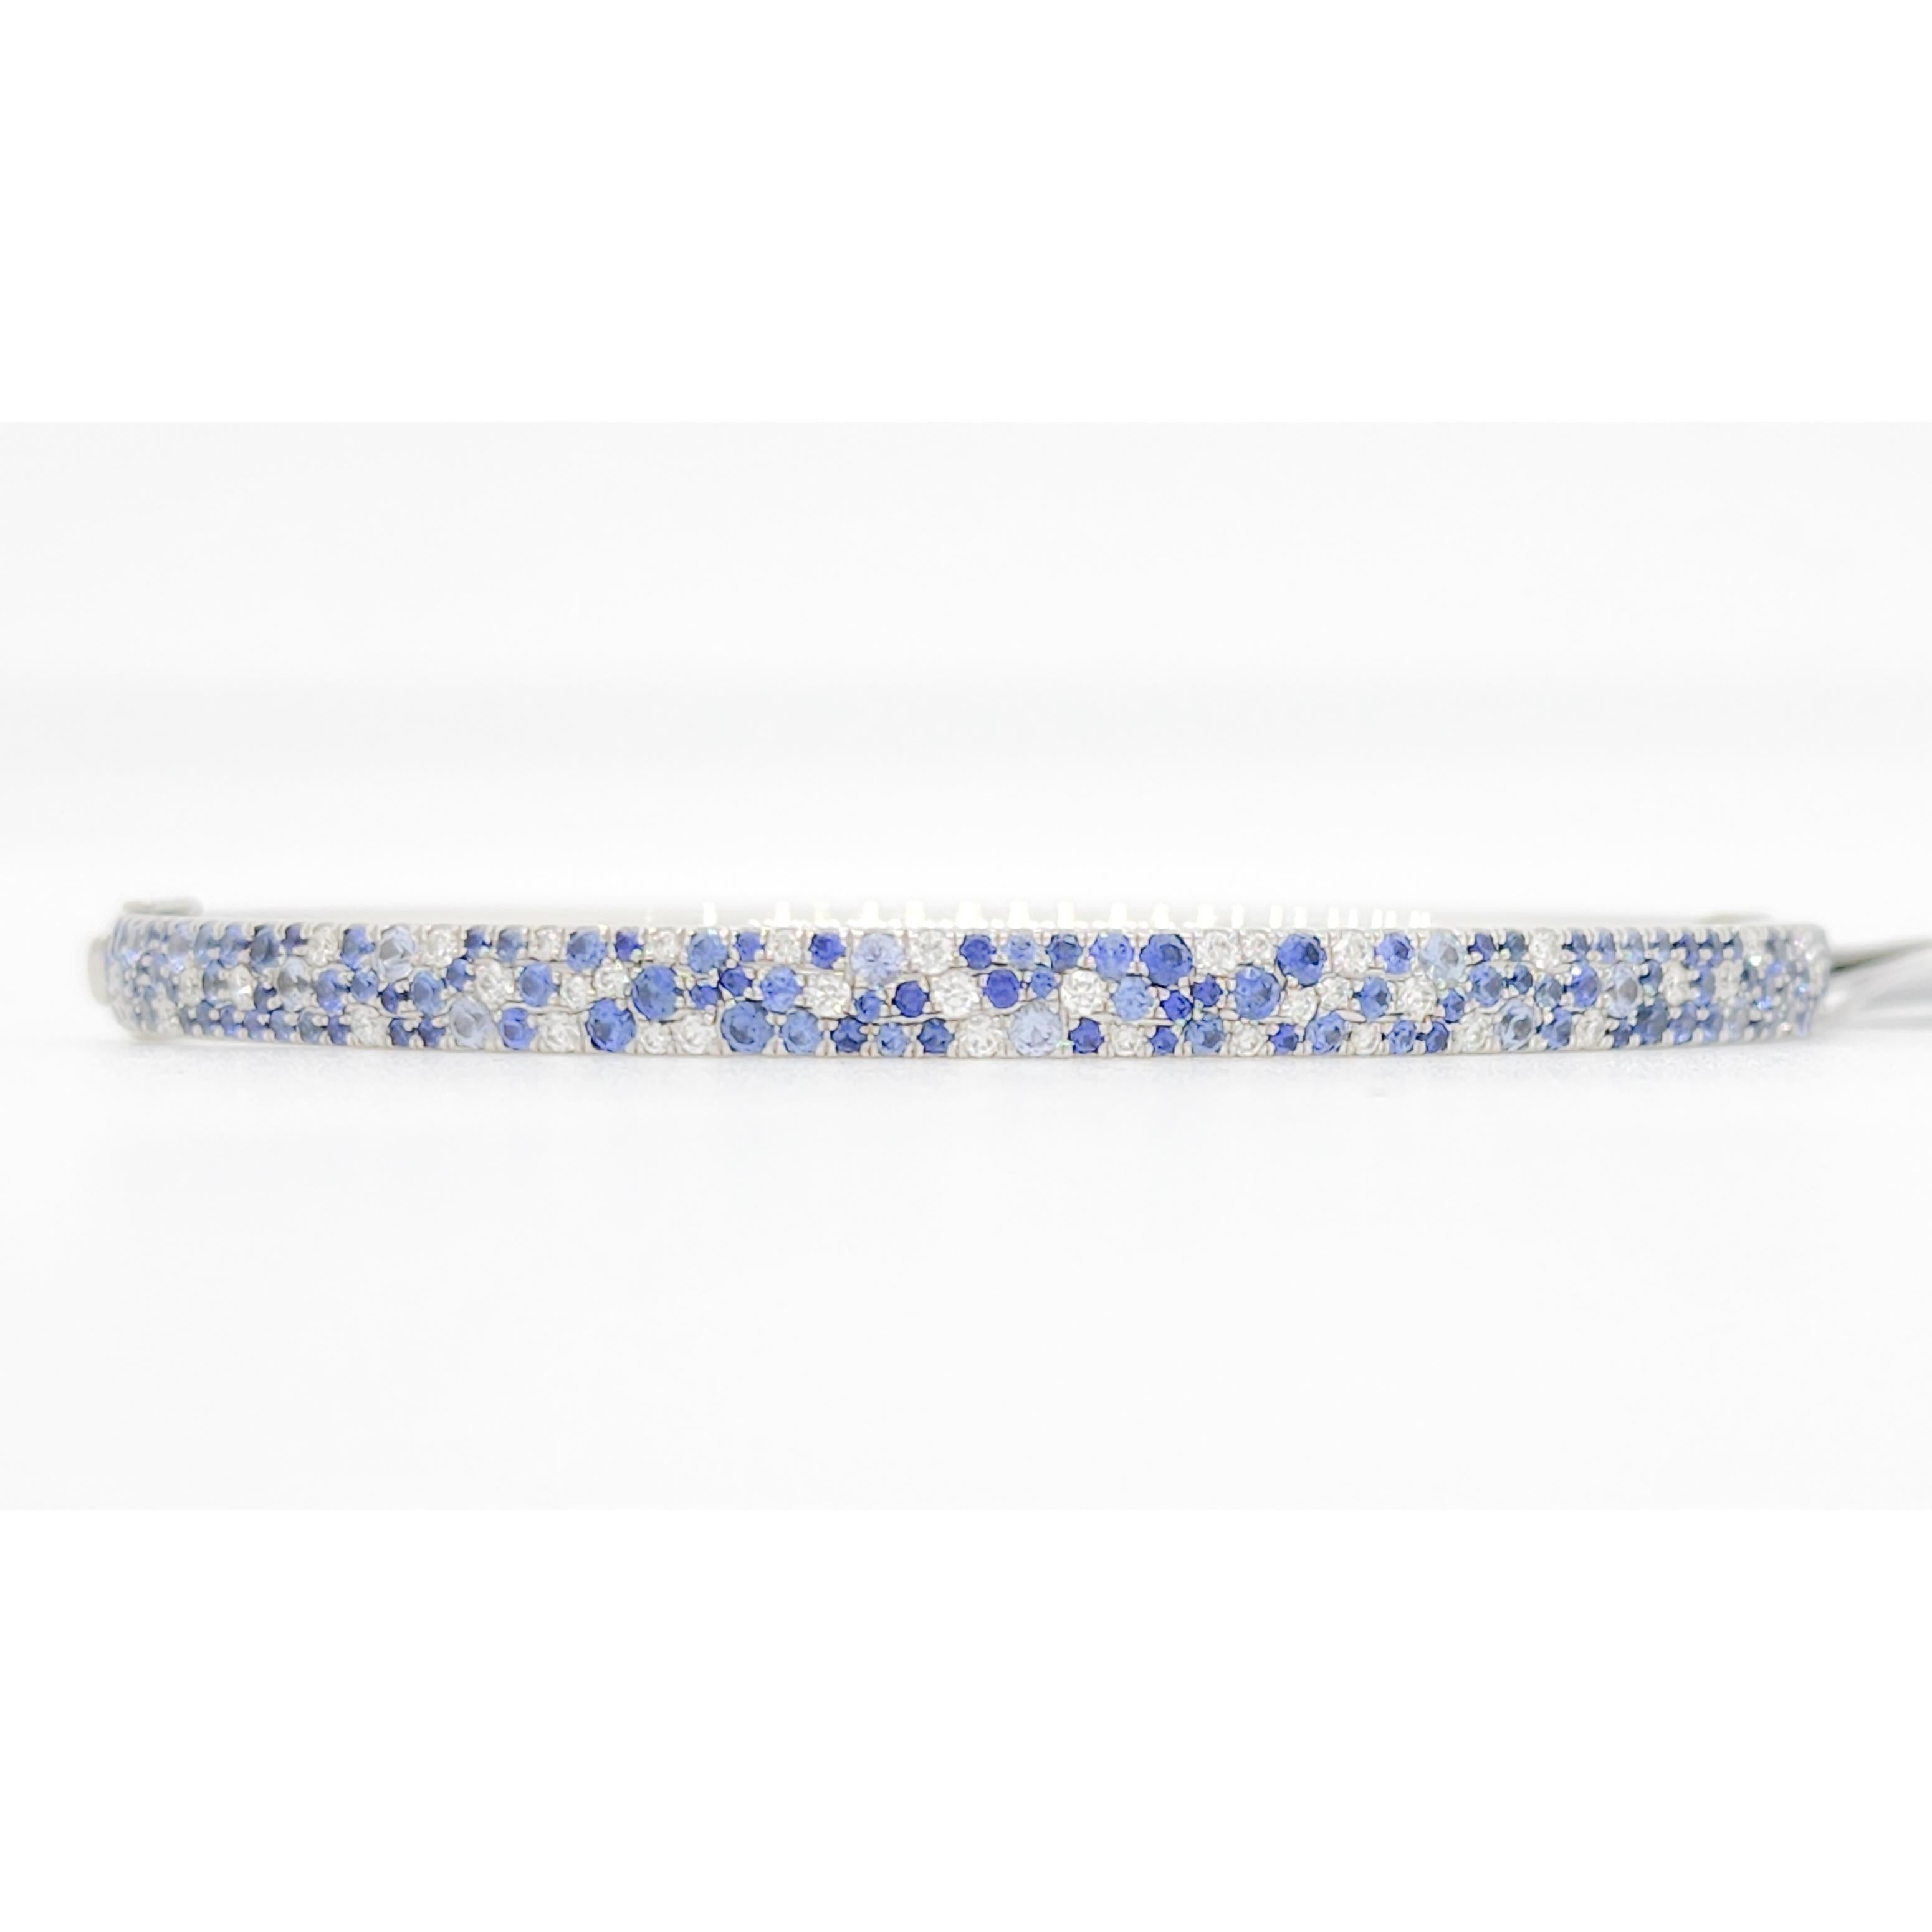 Gorgeous Tiffany & Company Metro bangle with 4.00 ct. good quality blue sapphire round and 1.00 ct. good quality white diamond rounds.  Handmade in 18k white gold.  